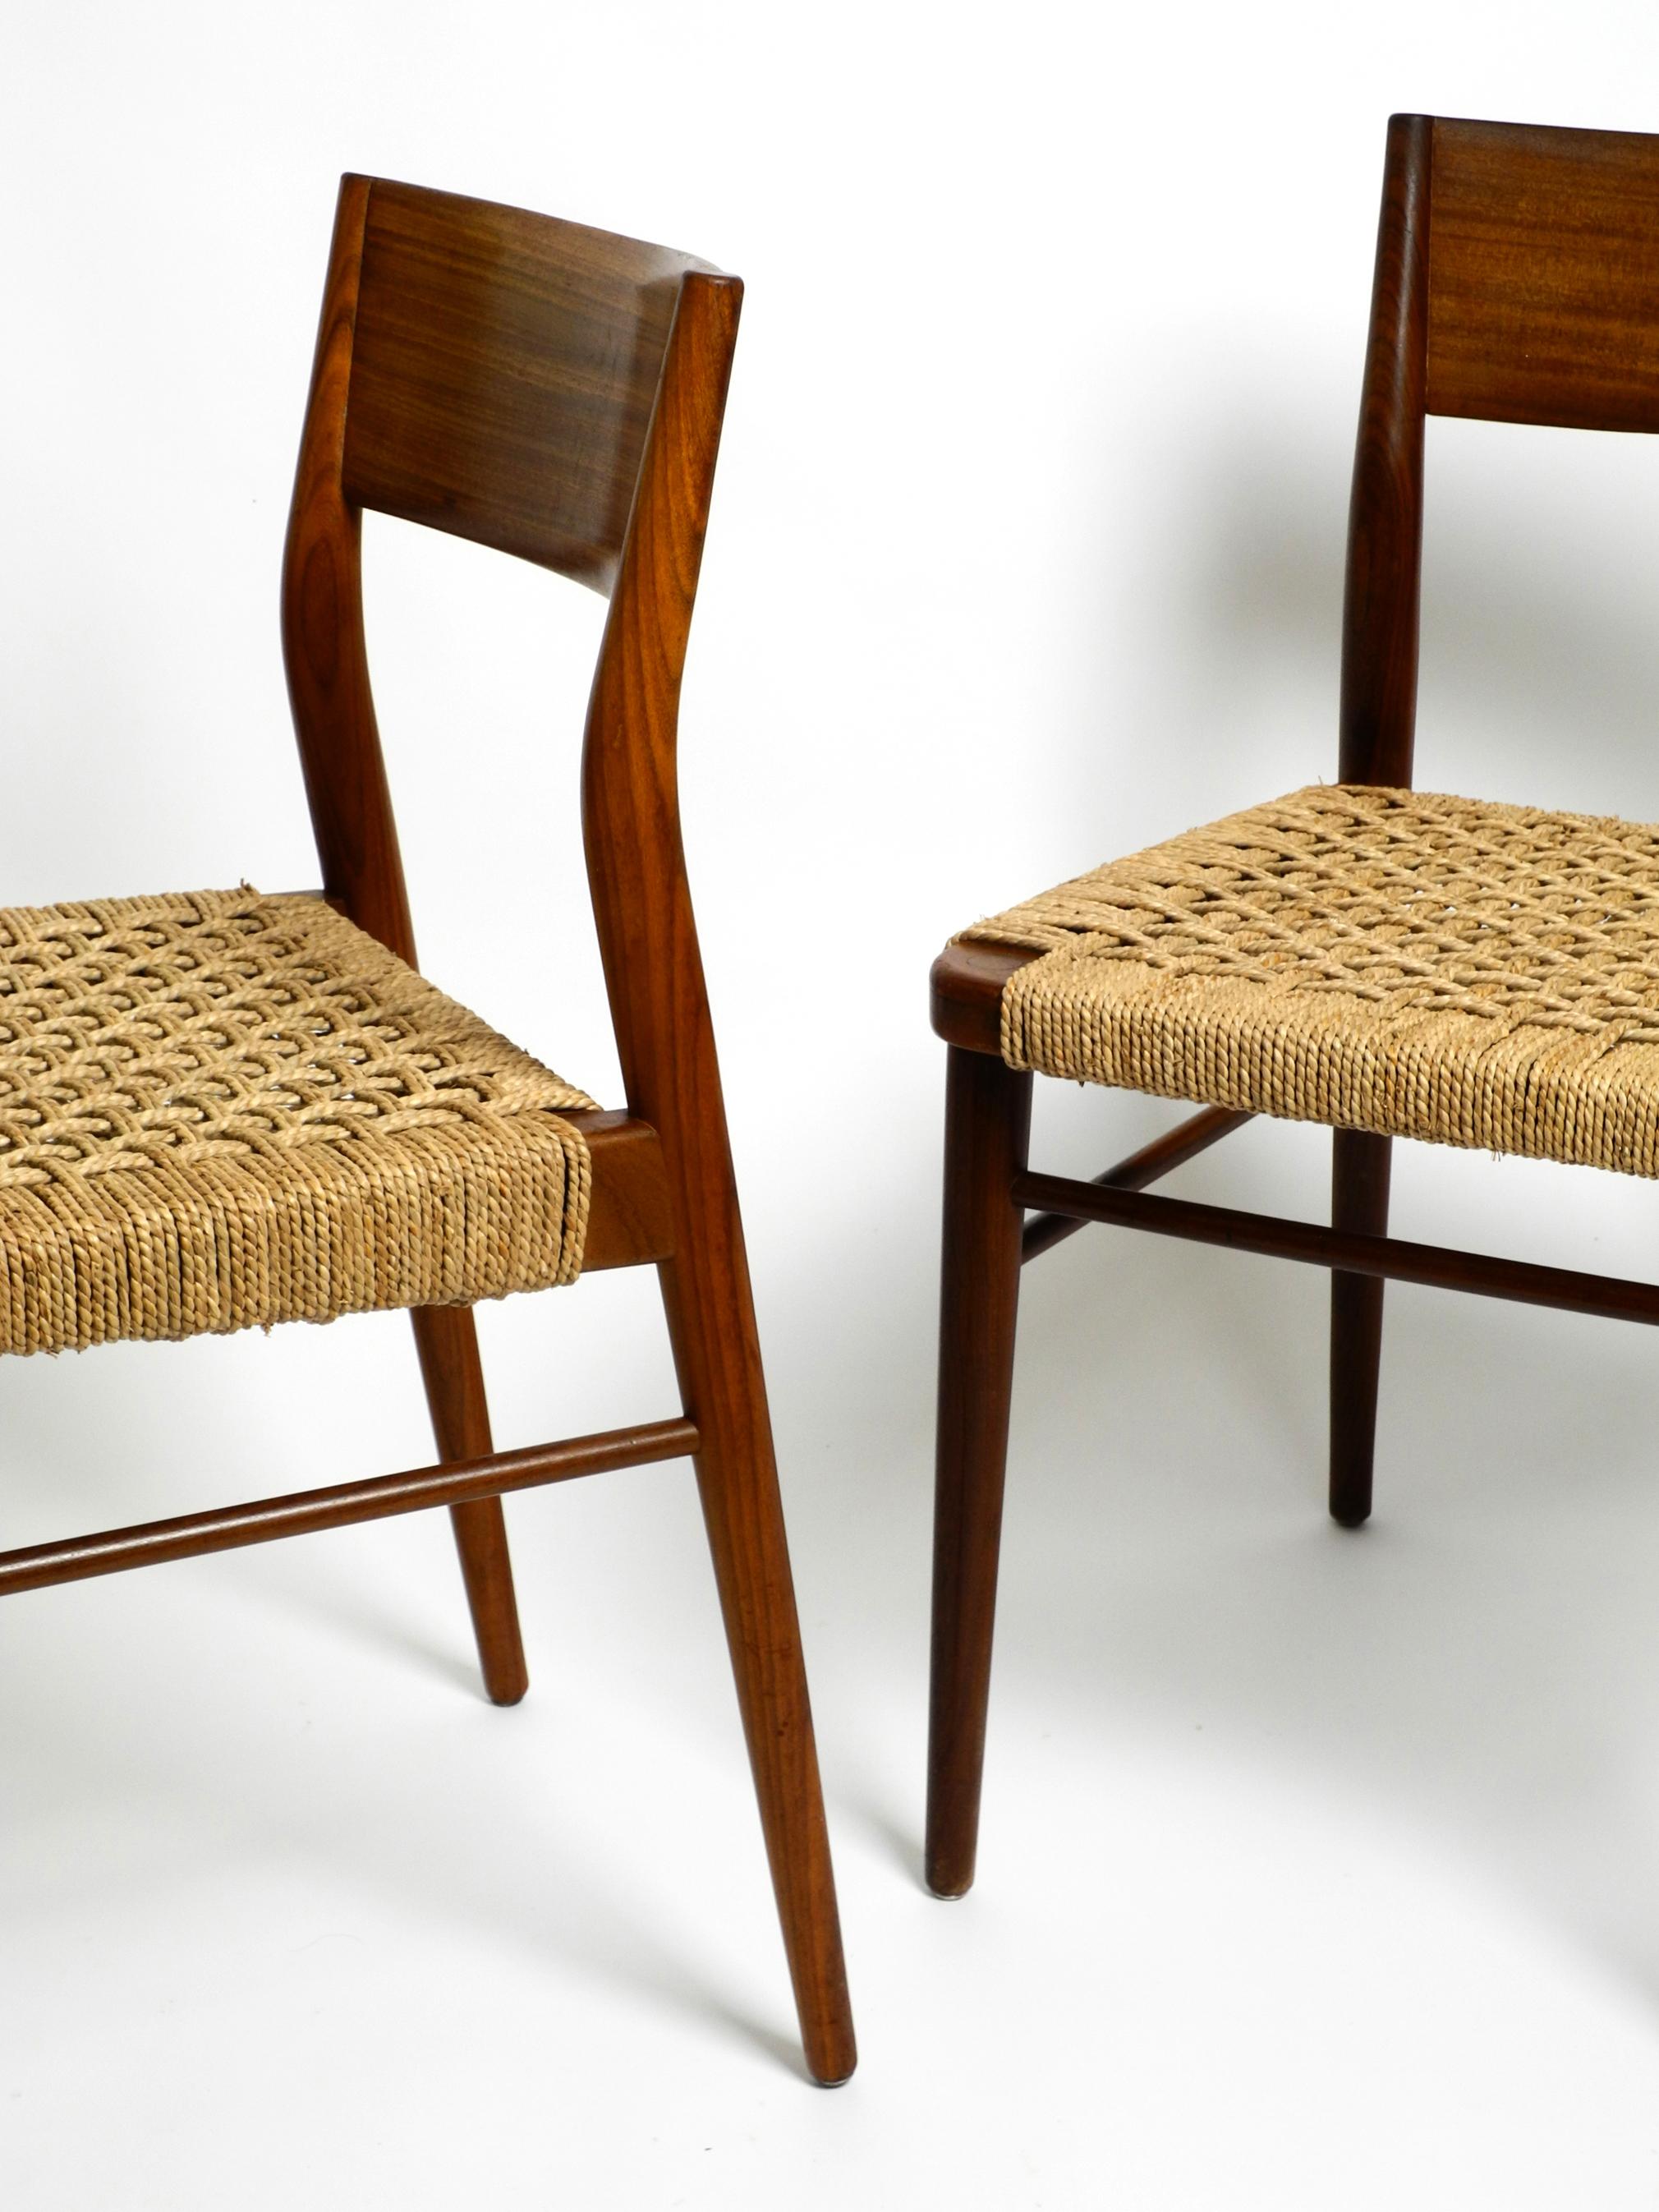 Cord Two Original 1960s Wilkhahn Chairs Made of Walnut with Wicker Cane For Sale